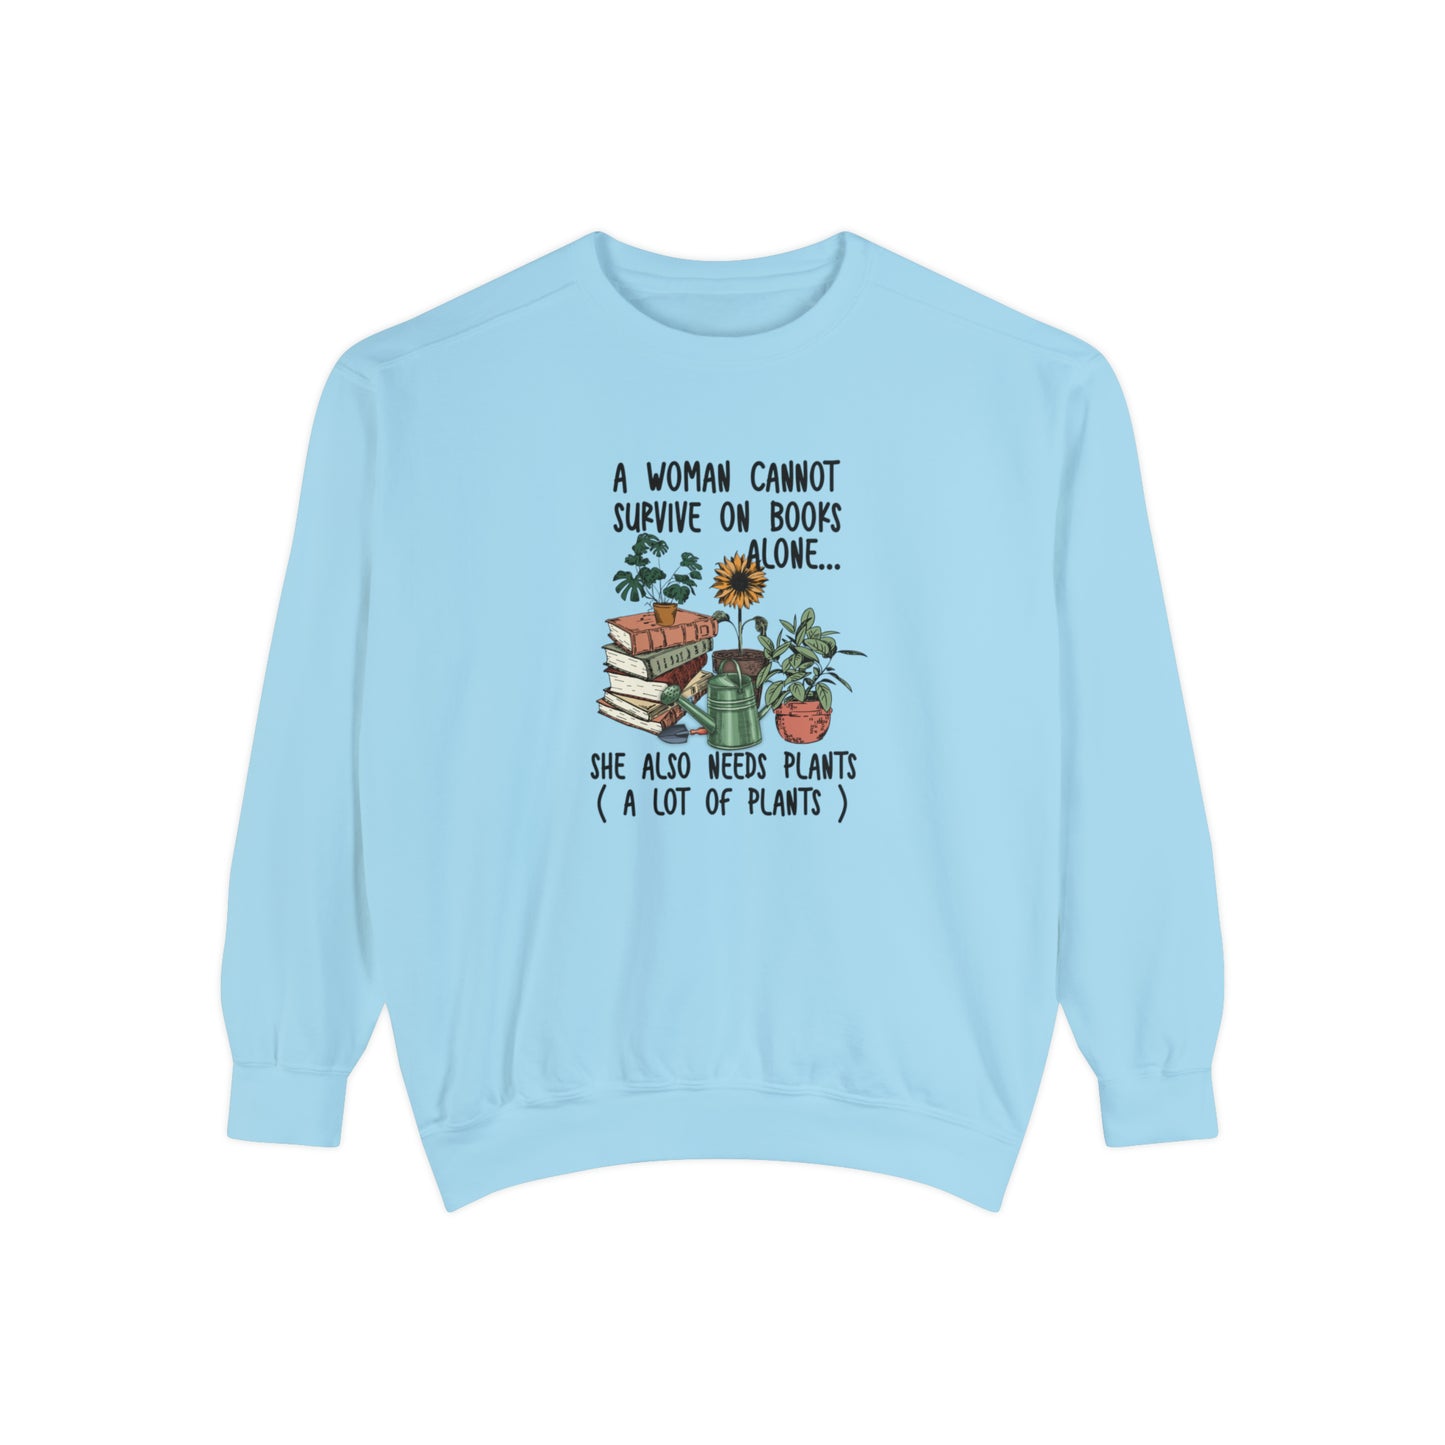 Books and plants Sweatshirt. Comfort colors sweatshirt for book lover and plant lady.